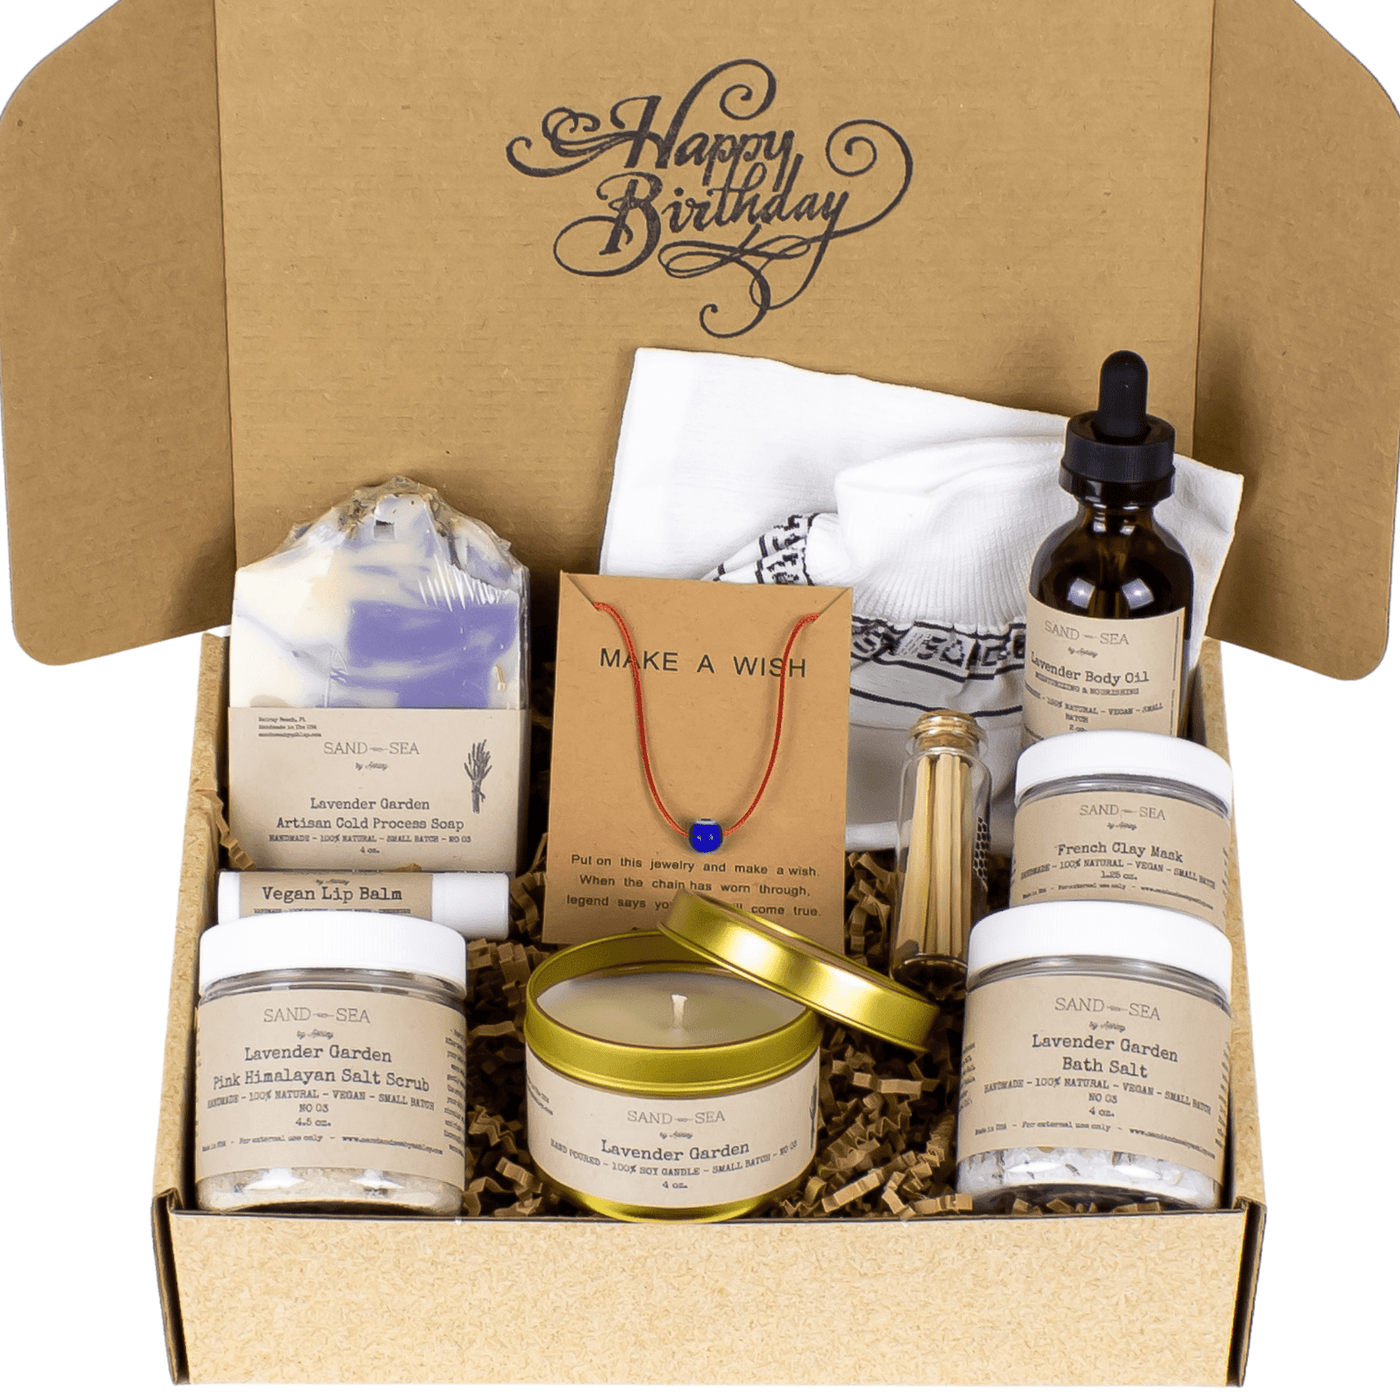 Birthday Gifts for Women,Spa Gift Baskets for Women Birthday Gift